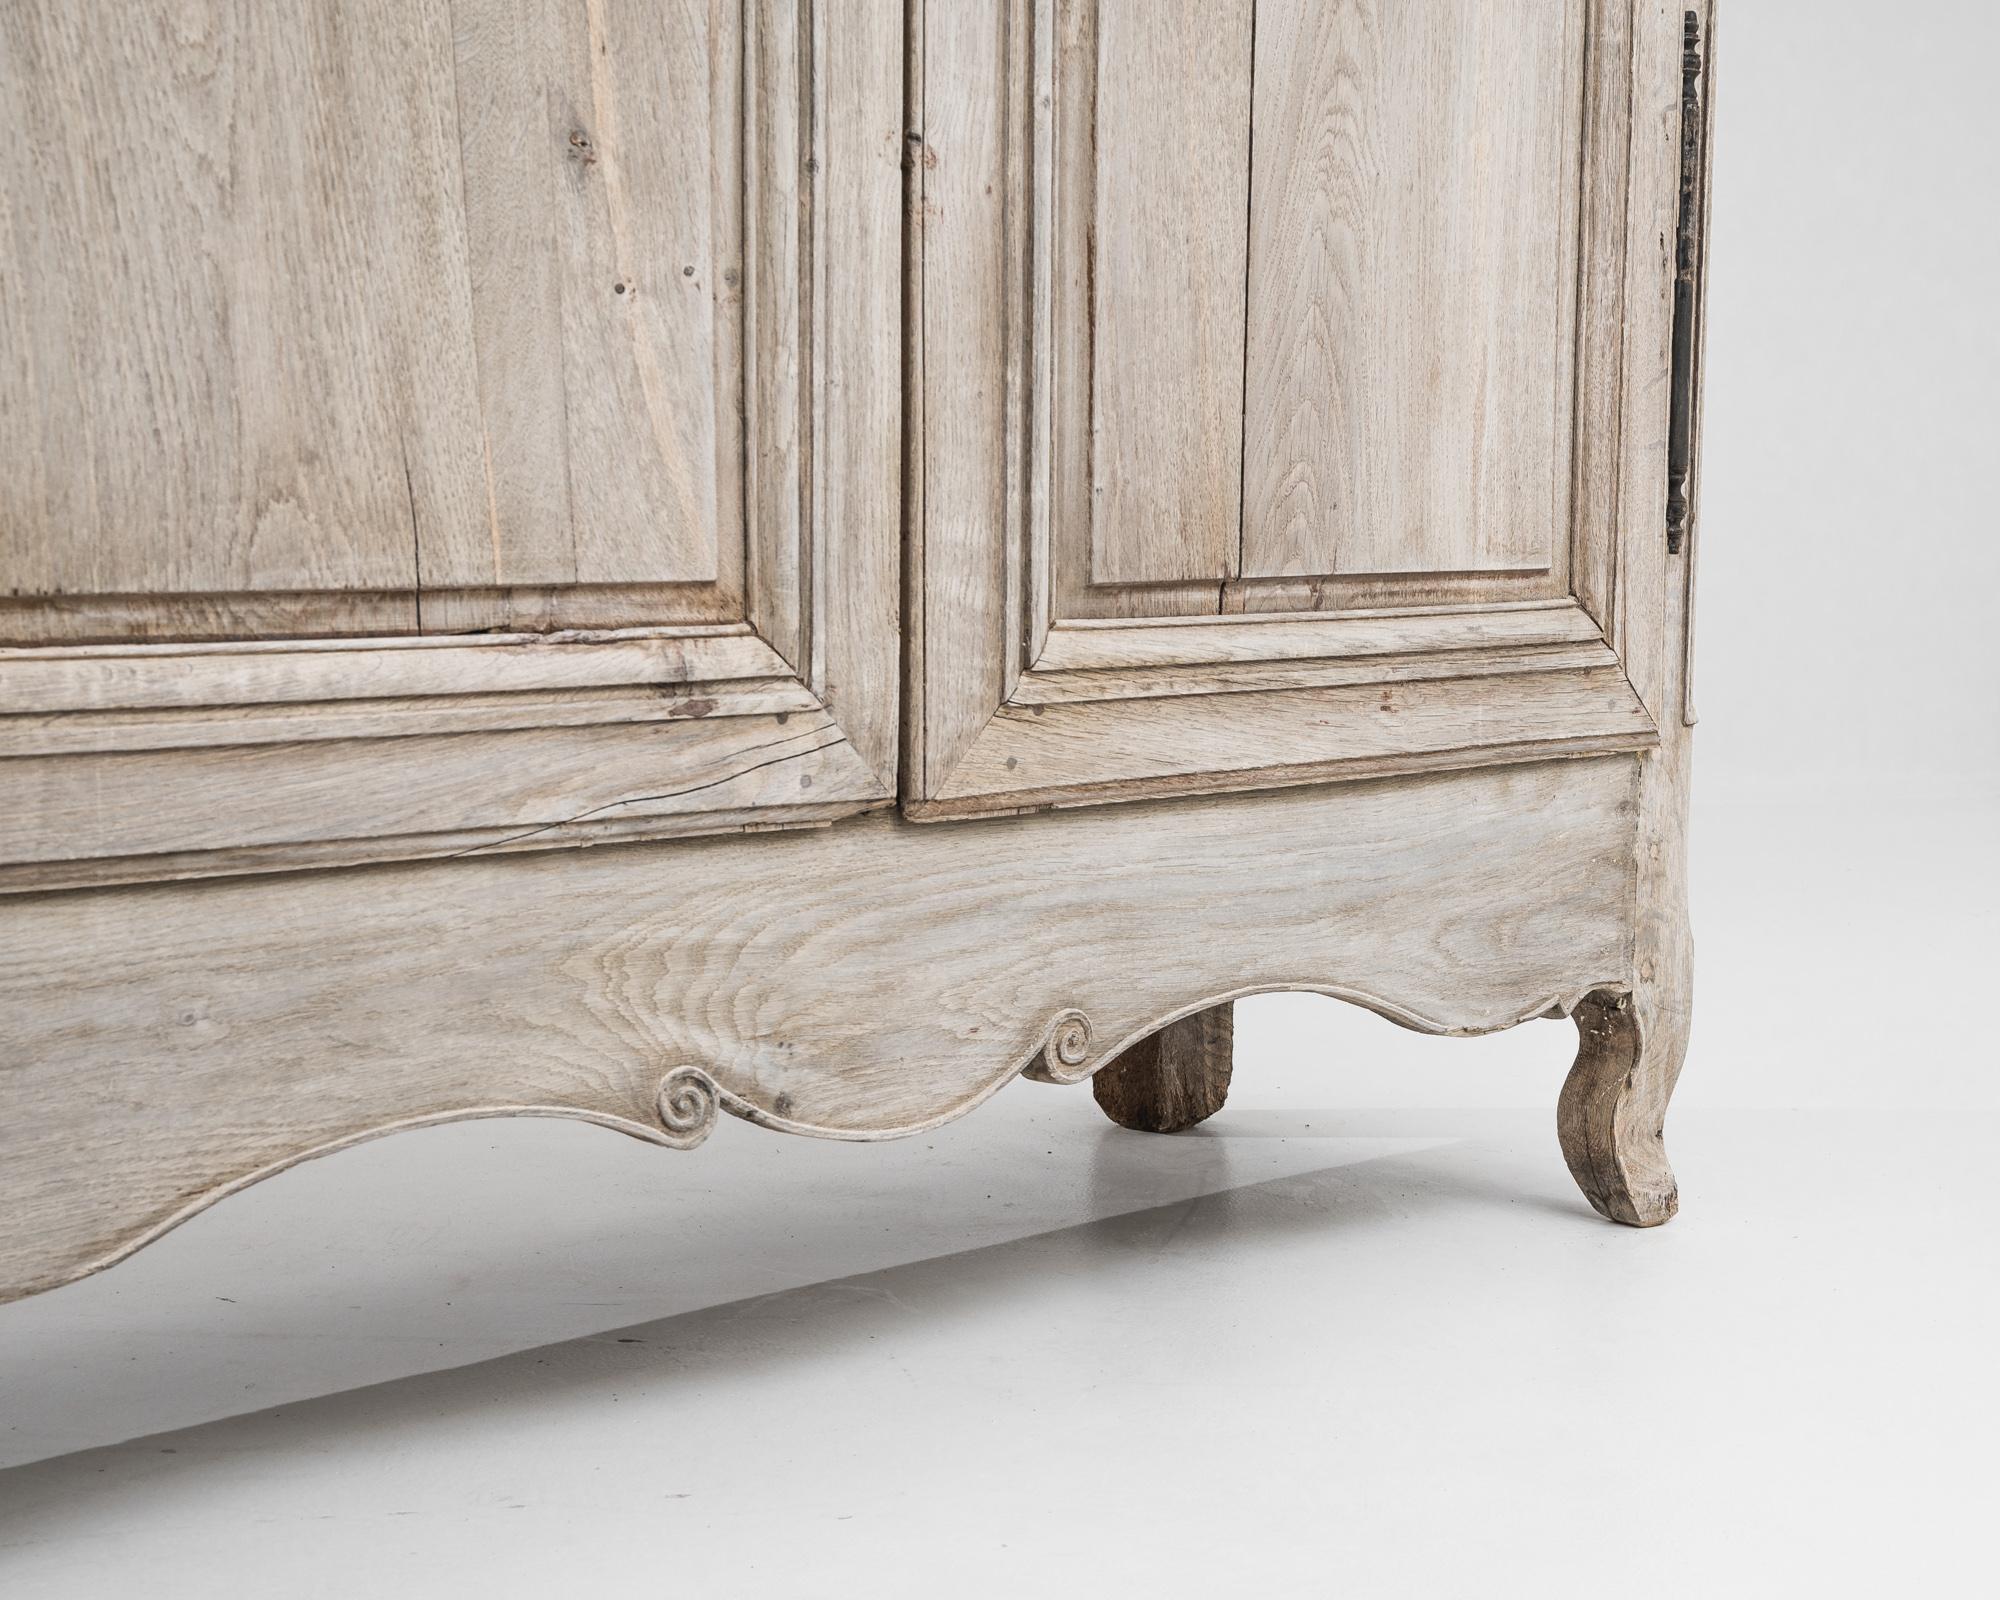 Created in the early 19th century, this French wooden cabinet is impressive in stature and blends an antique charm with unparalleled craftsmanship. Undergoing a delicate bleaching process, the oak's surface is rejuvenated, accentuating its natural